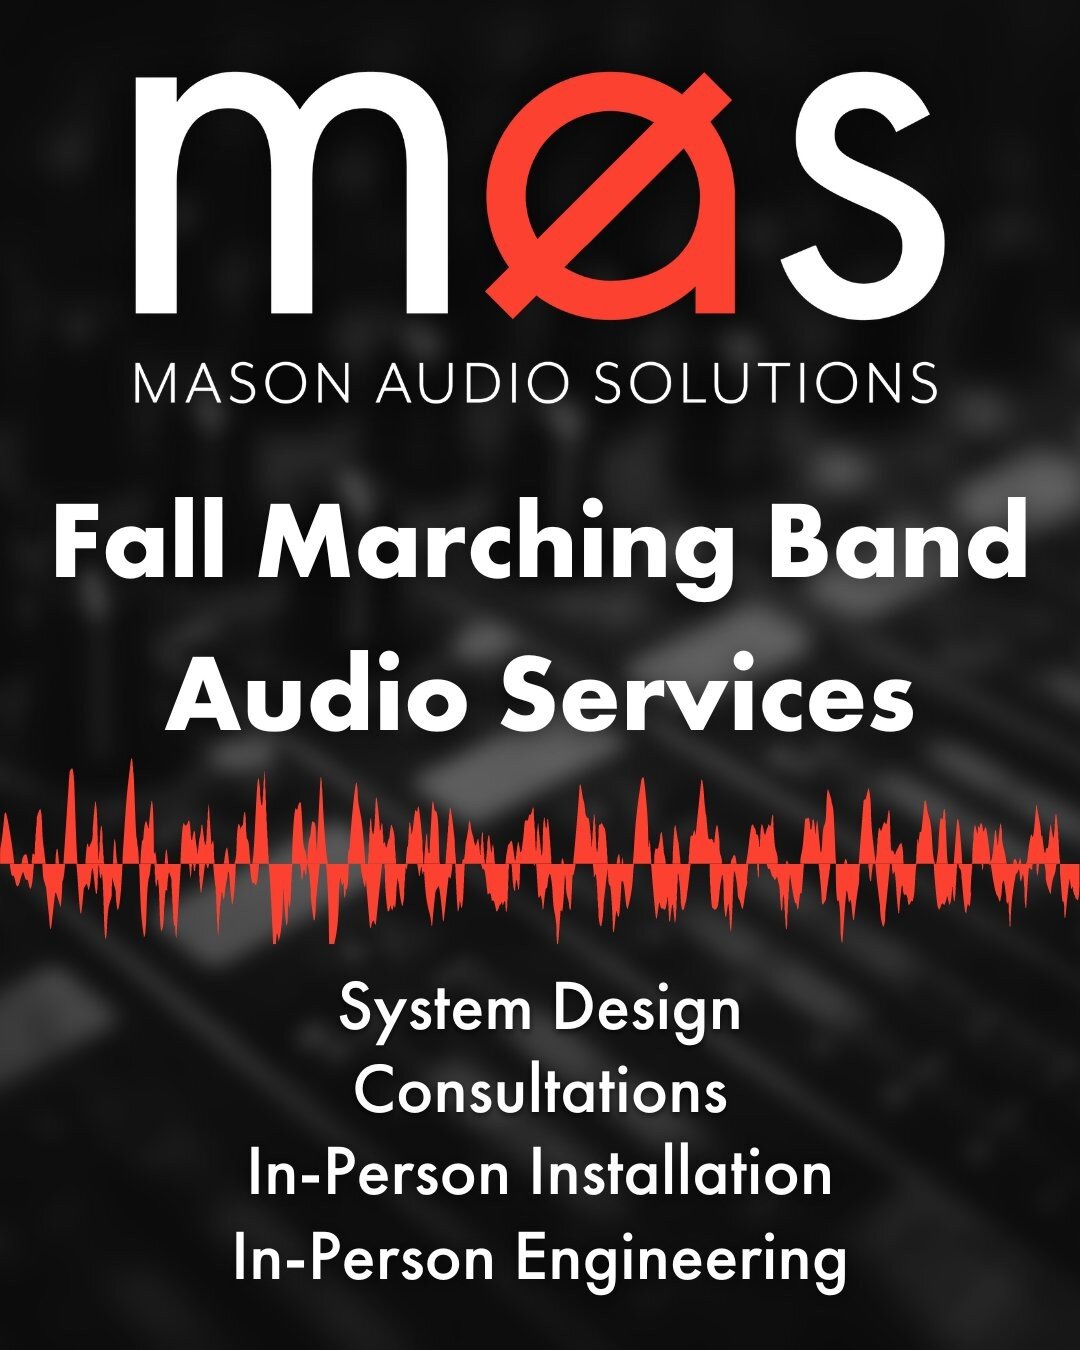 *Openings Still Available*

Looking to get your ensemble set up for success this season? MAS still has (limited) slots open for this Fall Season. With different tiers of services based on needs, there's bound to be a package that works for you and yo